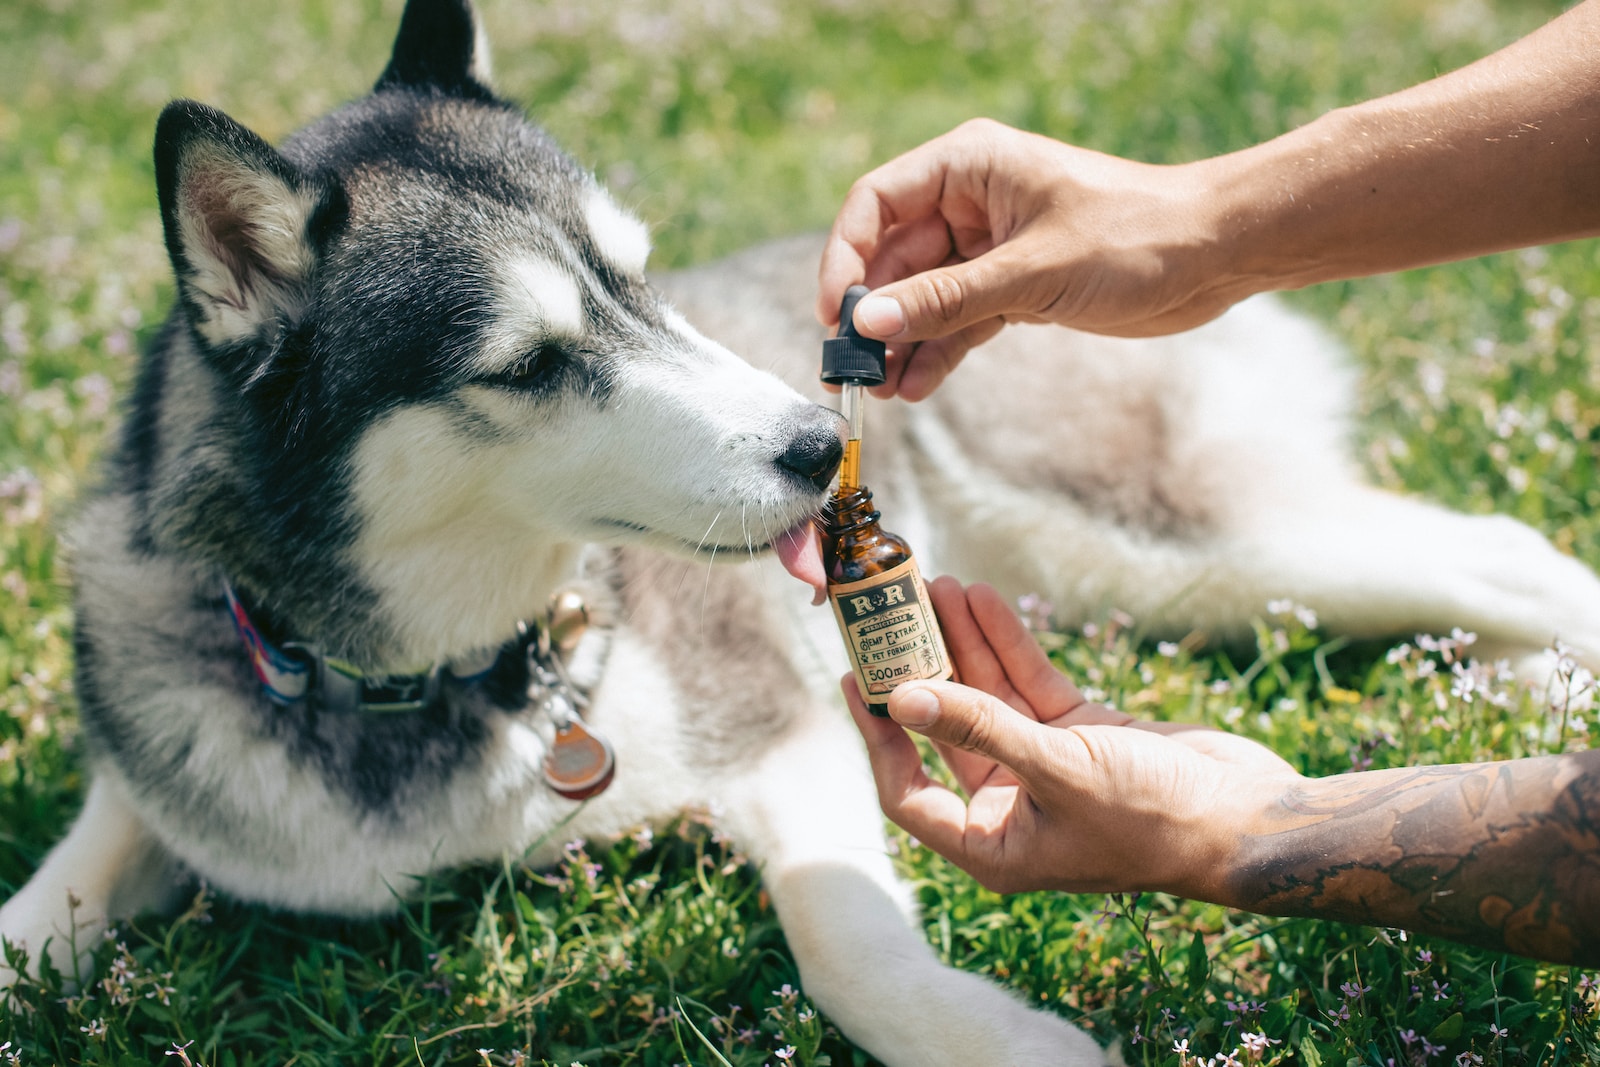 Common Dog Health Issues and How to Prevent Them